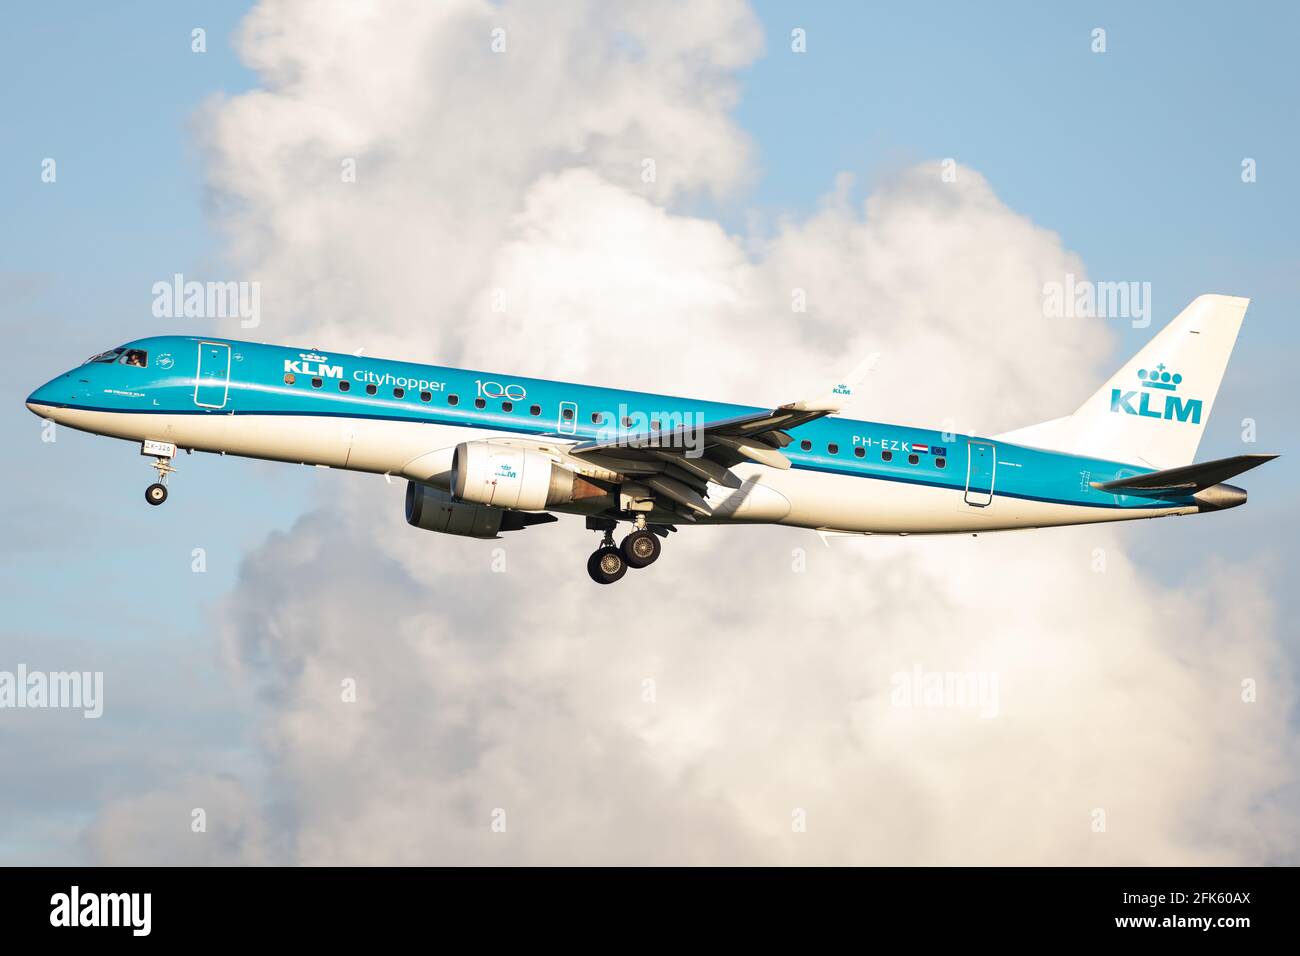 AMSTERDAM, NETHERLANDS - Sep 12, 2020: KLM (KL / KLM) approaching Amsterdam Schiphol Airport (EHAM/AMS) with an Embraer E190 (PH-EZK/19000326). Stock Photo